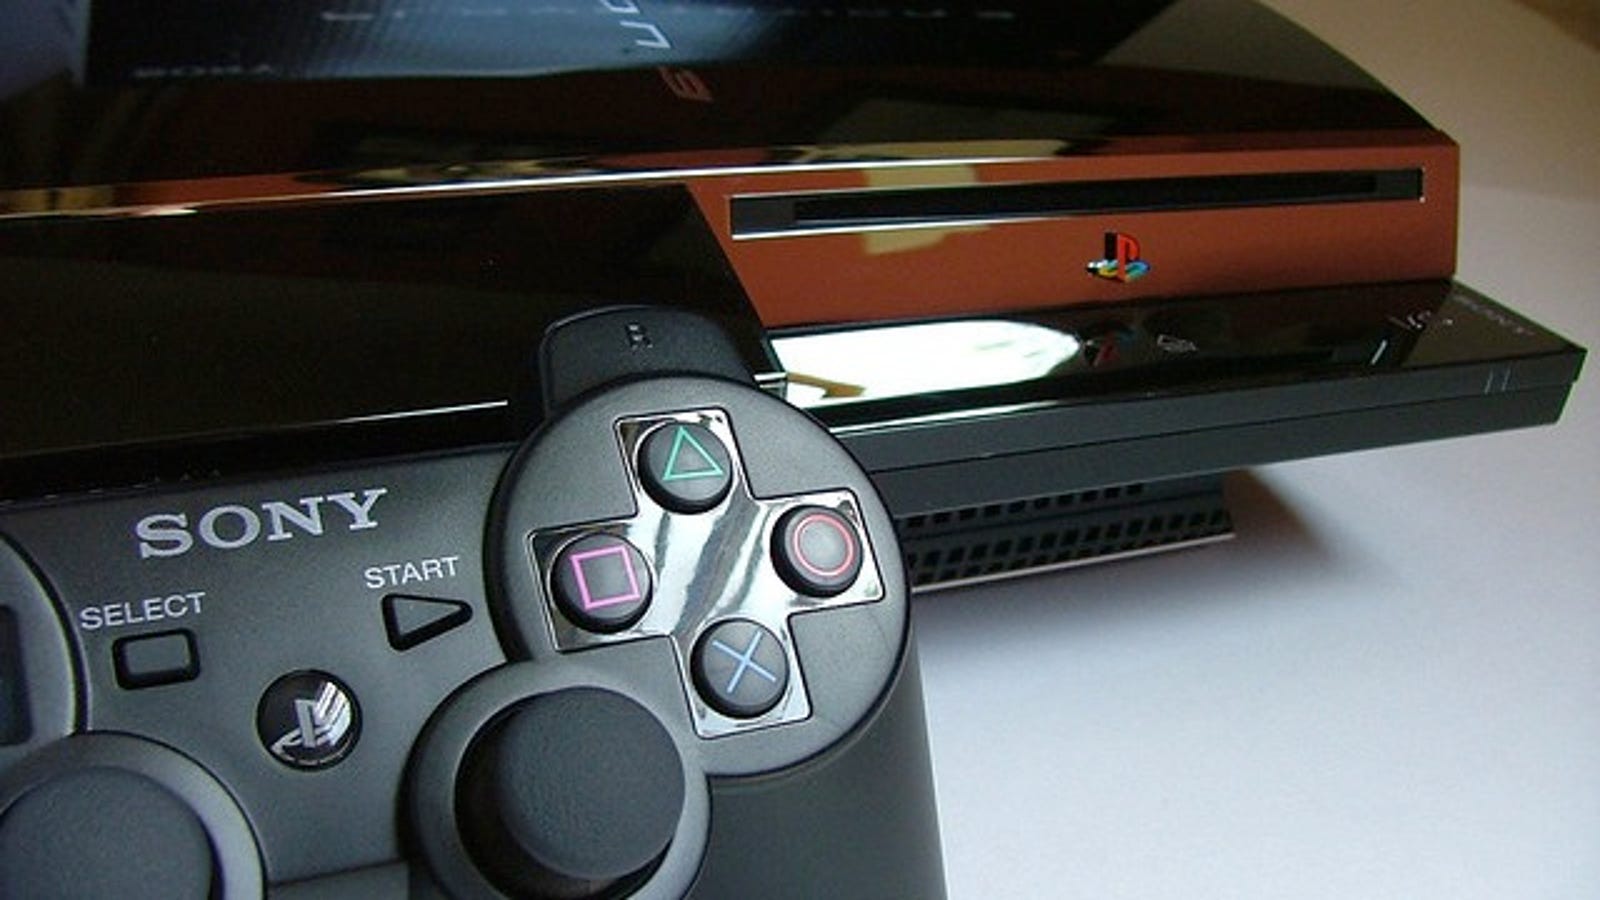  Console Gaming Is Probably Costing You More Than You Think